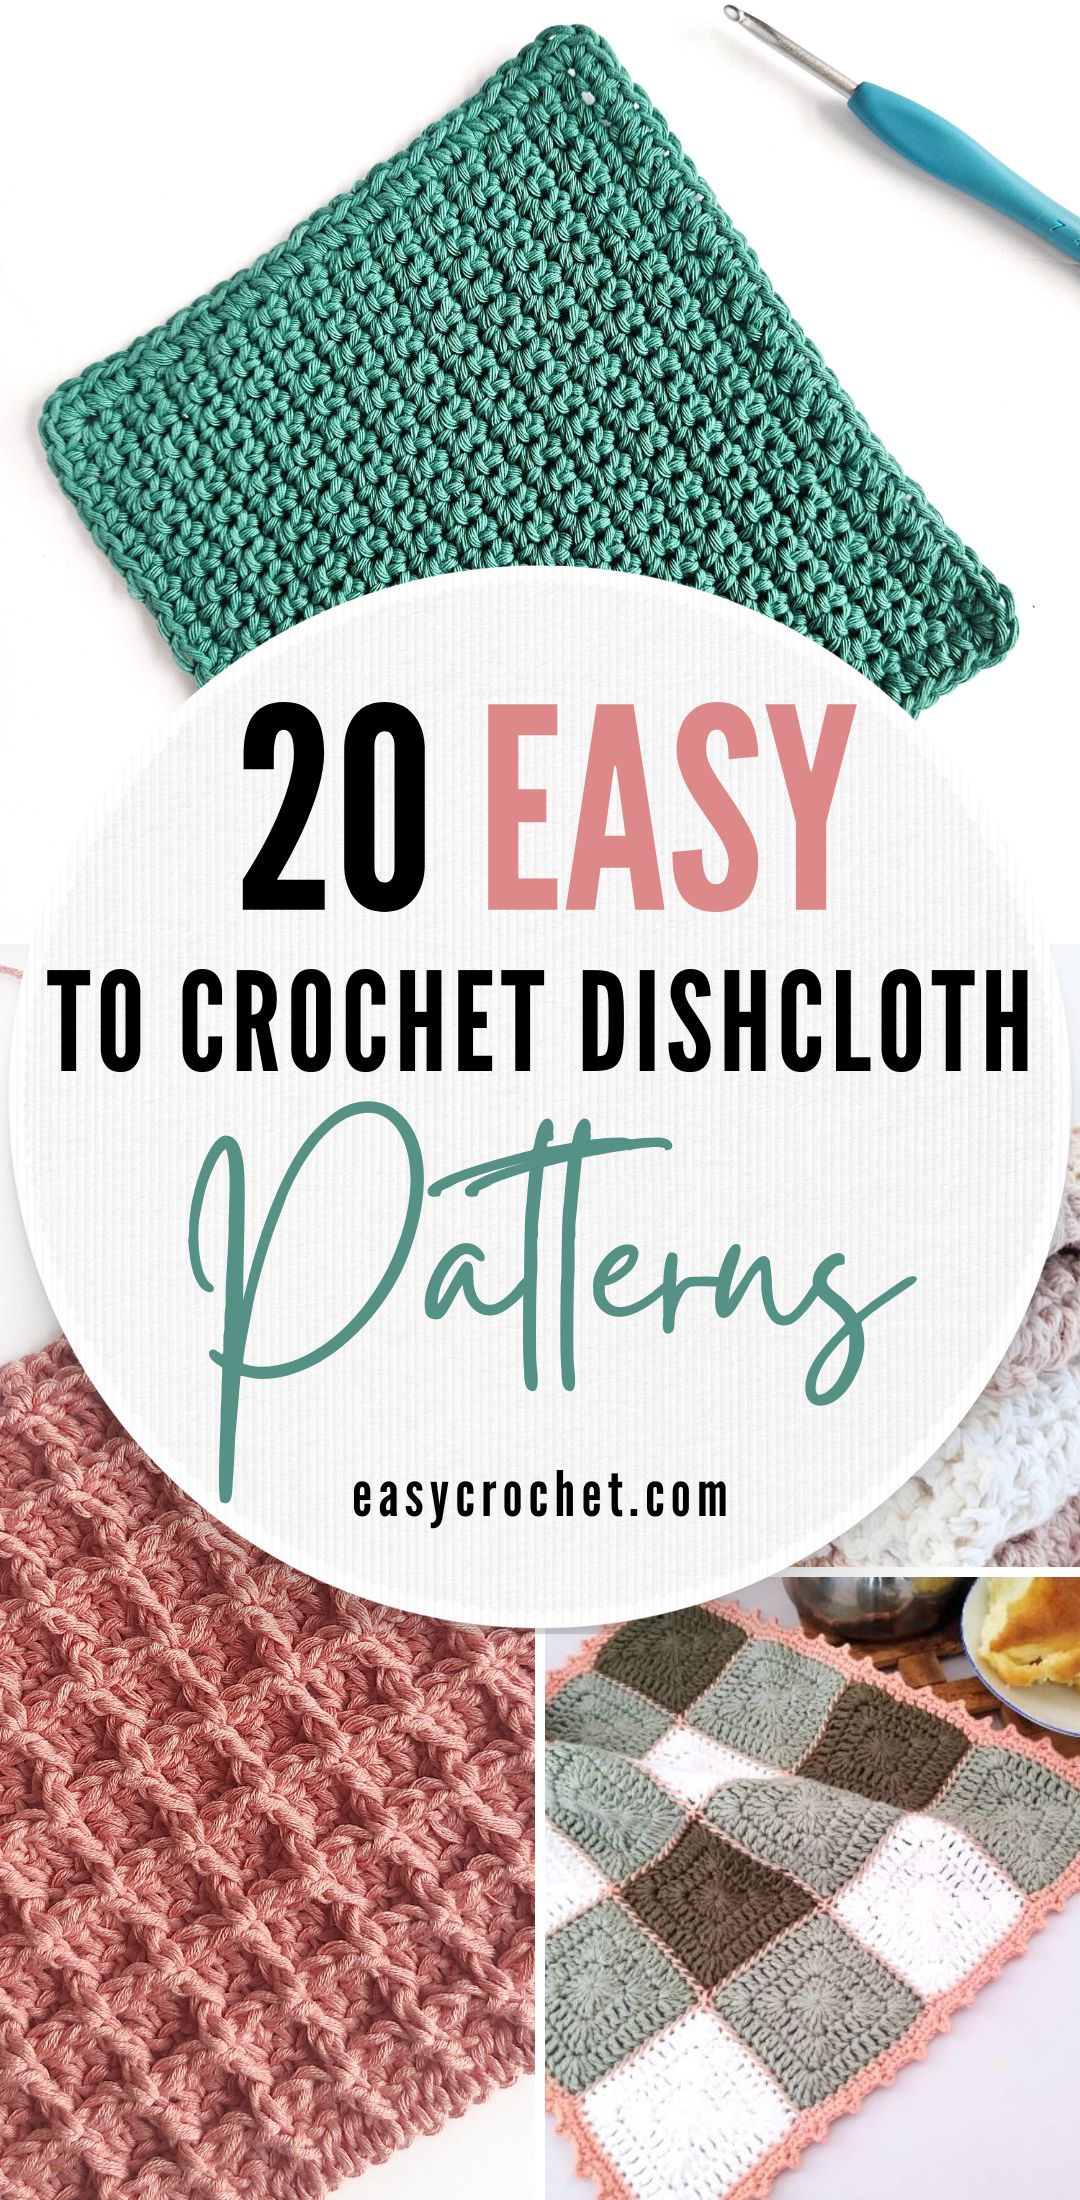 easy Crochet dishcloth pattern roundup collection